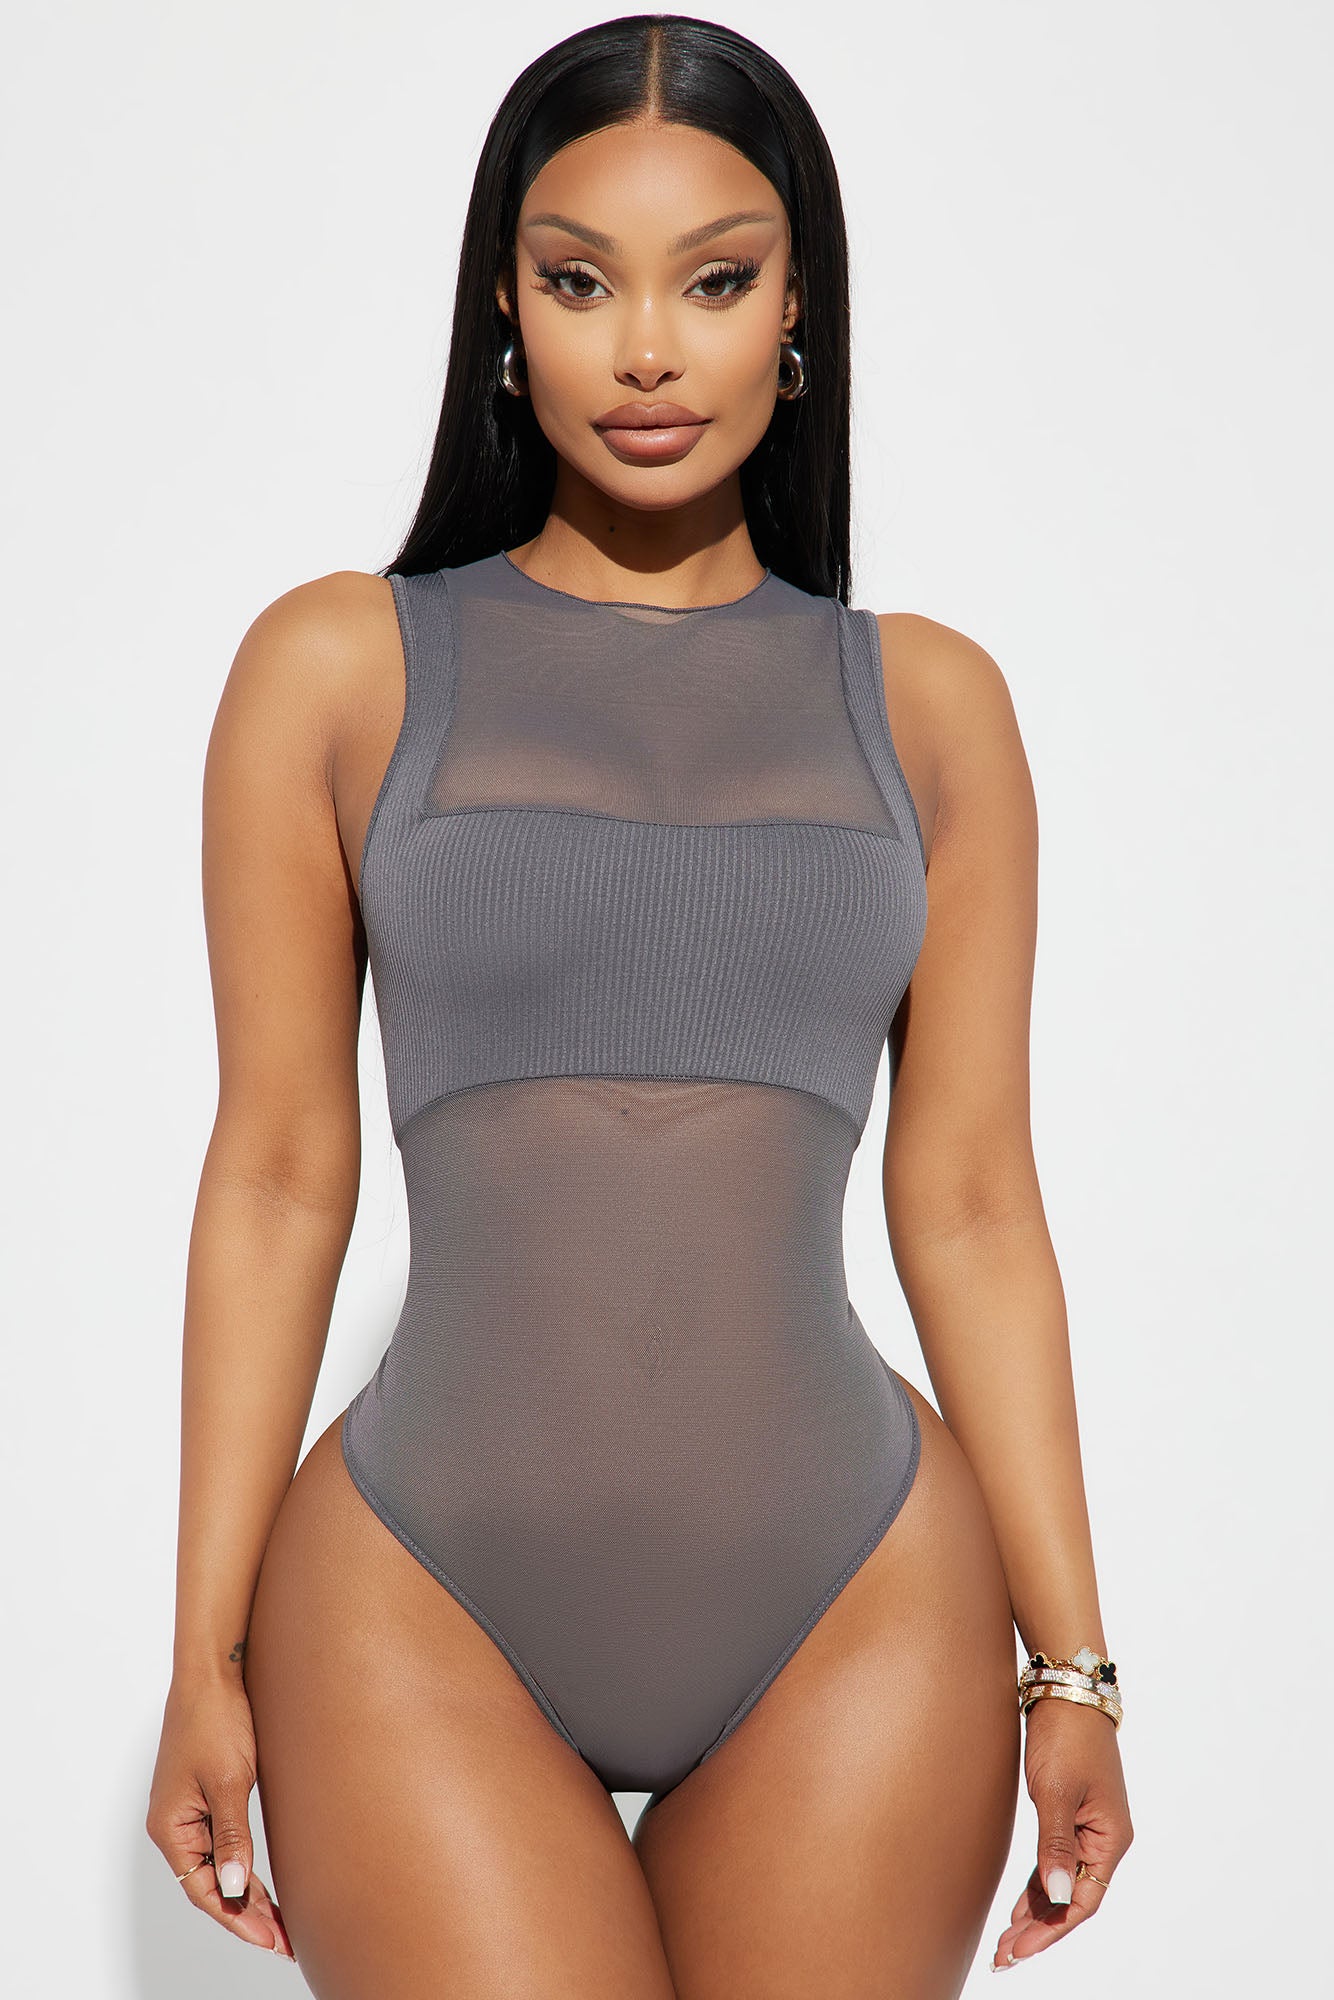 d9731321ef4e063ebbee79298fa36f56  Sheer bodysuit outfit, Fashion, Body suit  outfits